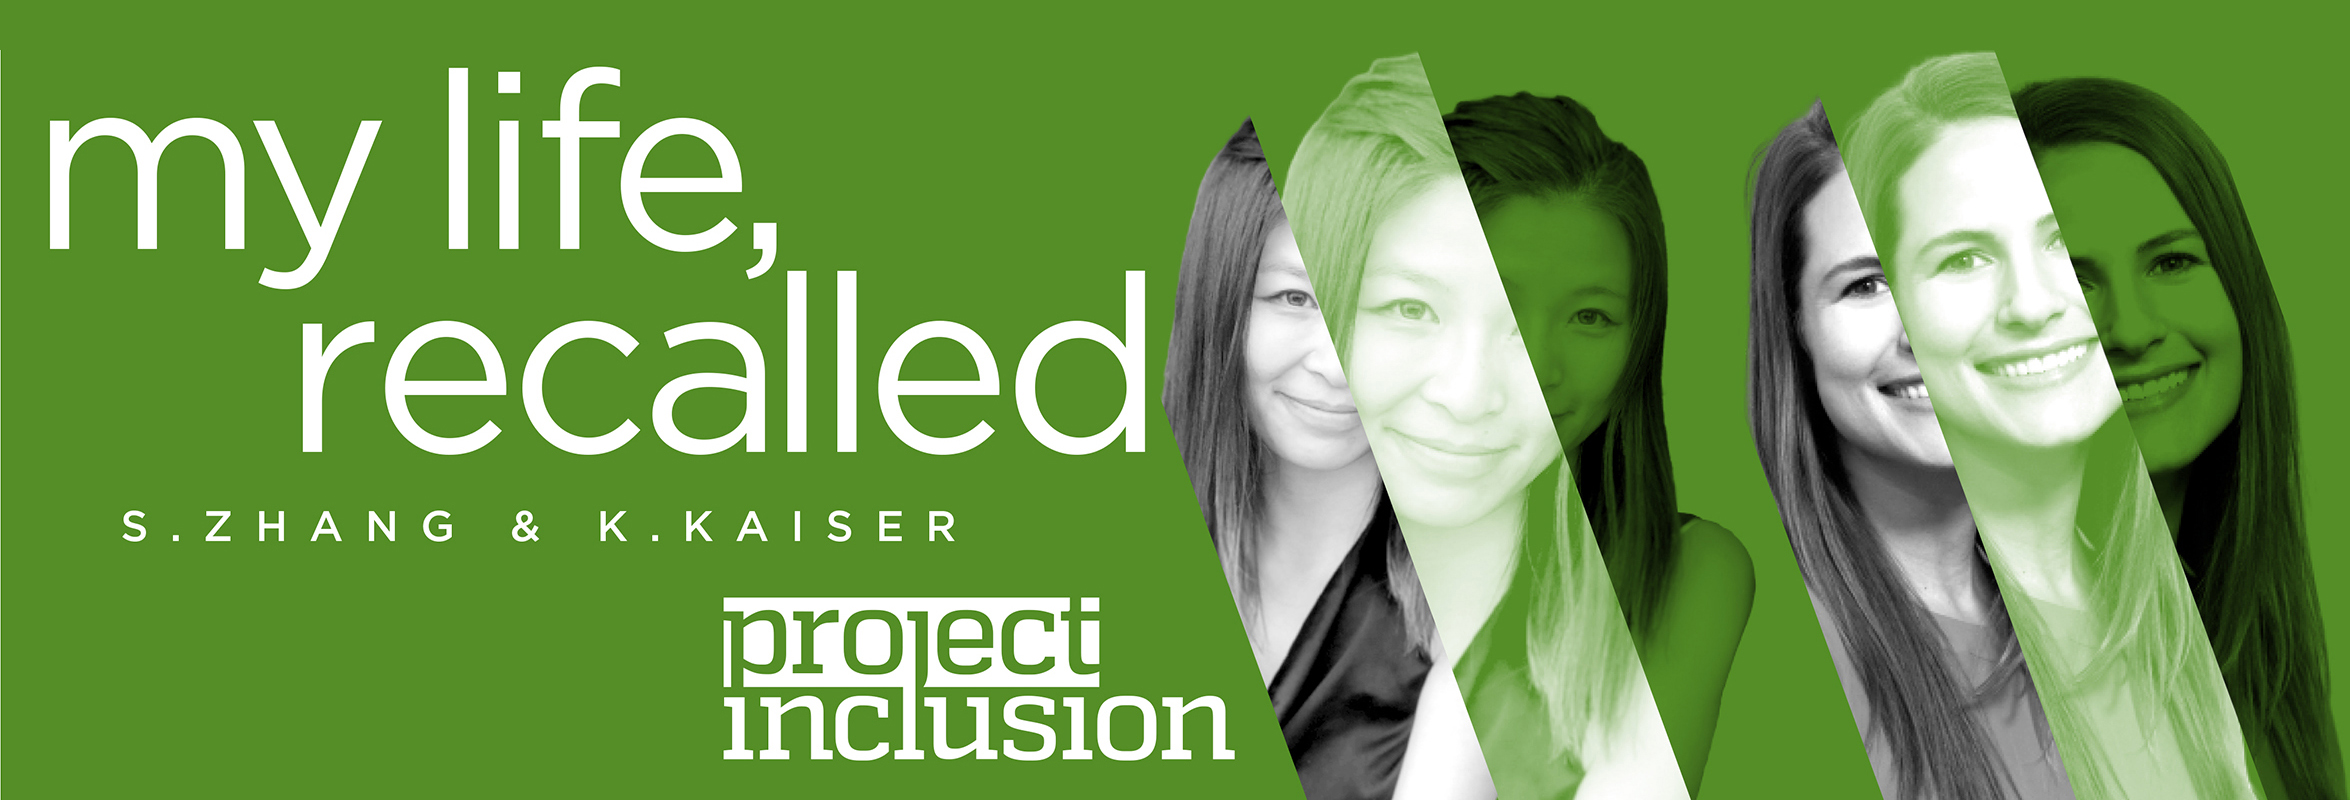 Green banner "my life recalled" with portraits of Sharon and kristie sliced diagonally for a graphic effect.